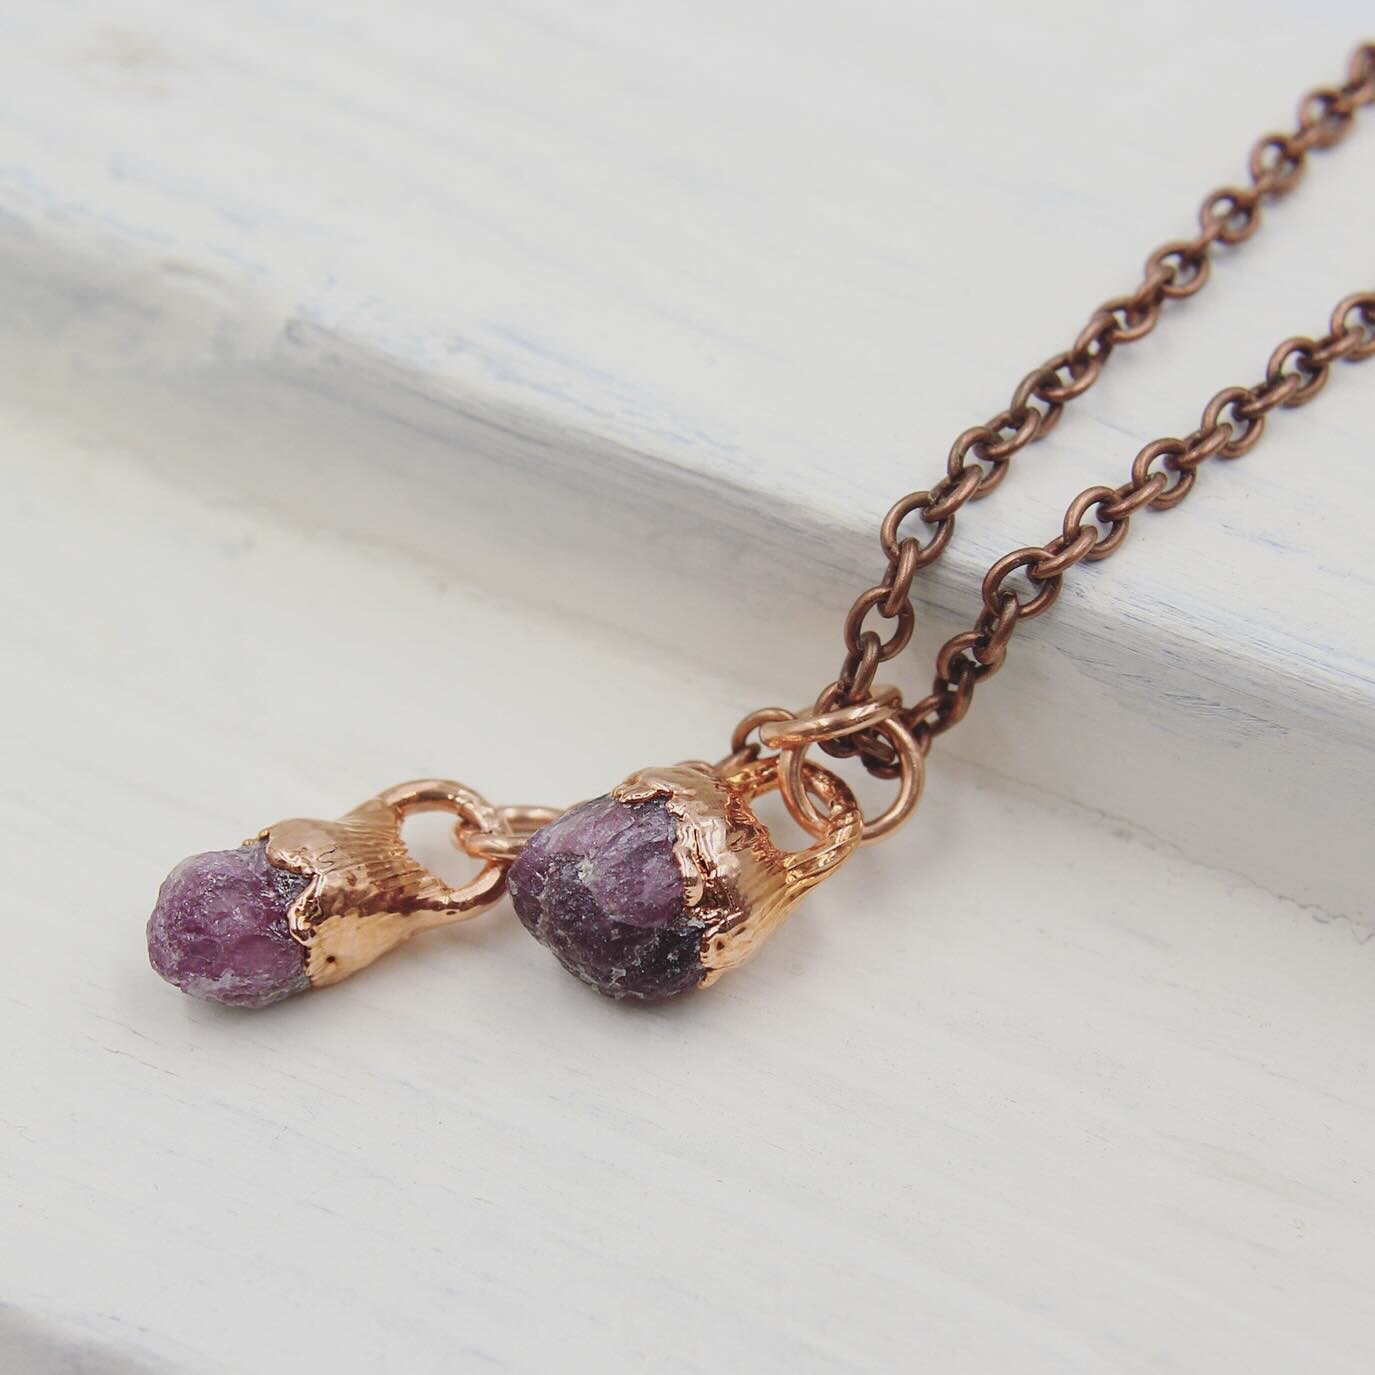 Bringing some new designs with me to the market this Saturday! This drop necklace has two tiny raw rubies and it&rsquo;s quickly become one of my favorites. What do we think, should I make more of these daintier drop designs?